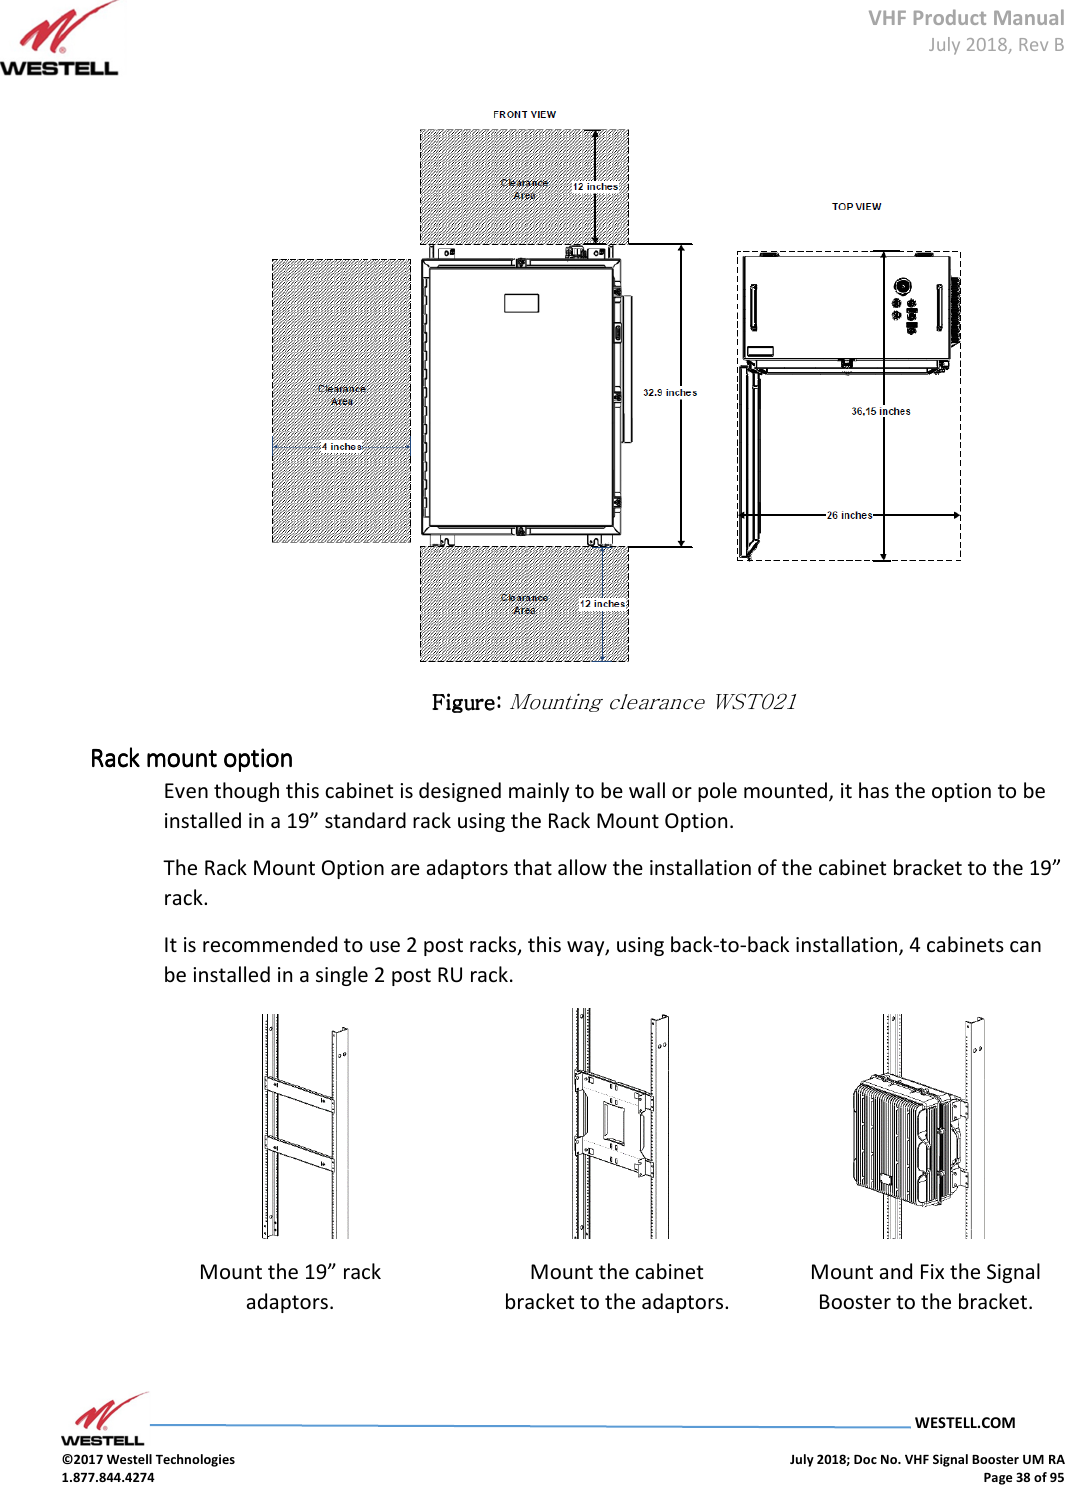 VHF Product Manual July 2018, Rev B   WESTELL.COM  ©2017 Westell Technologies    July 2018; Doc No. VHF Signal Booster UM RA 1.877.844.4274    Page 38 of 95   Figure: Figure: Figure: Figure: Mounting clearance WST021 Rack mount optionRack mount optionRack mount optionRack mount option    Even though this cabinet is designed mainly to be wall or pole mounted, it has the option to be installed in a 19” standard rack using the Rack Mount Option. The Rack Mount Option are adaptors that allow the installation of the cabinet bracket to the 19” rack. It is recommended to use 2 post racks, this way, using back-to-back installation, 4 cabinets can be installed in a single 2 post RU rack.                                          Mount the 19” rack adaptors. Mount the cabinet bracket to the adaptors. Mount and Fix the Signal Booster to the bracket. 